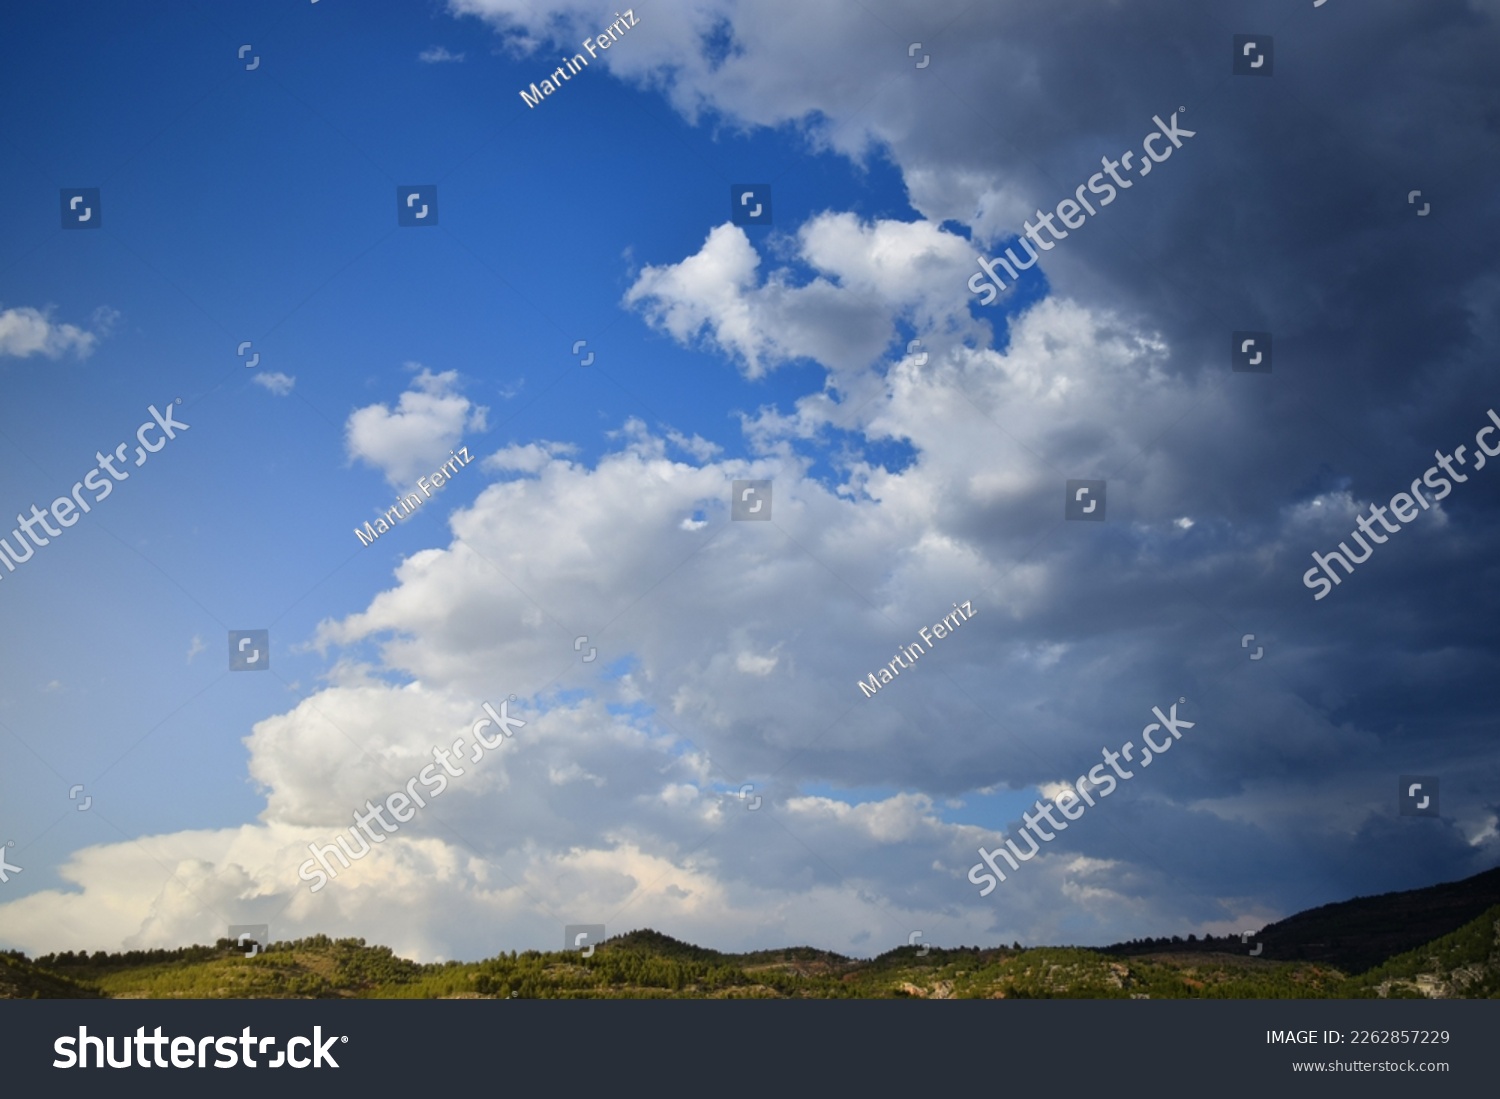 Storm clouds advance on a clear blue sky over a narrow mountainous horizon #2262857229